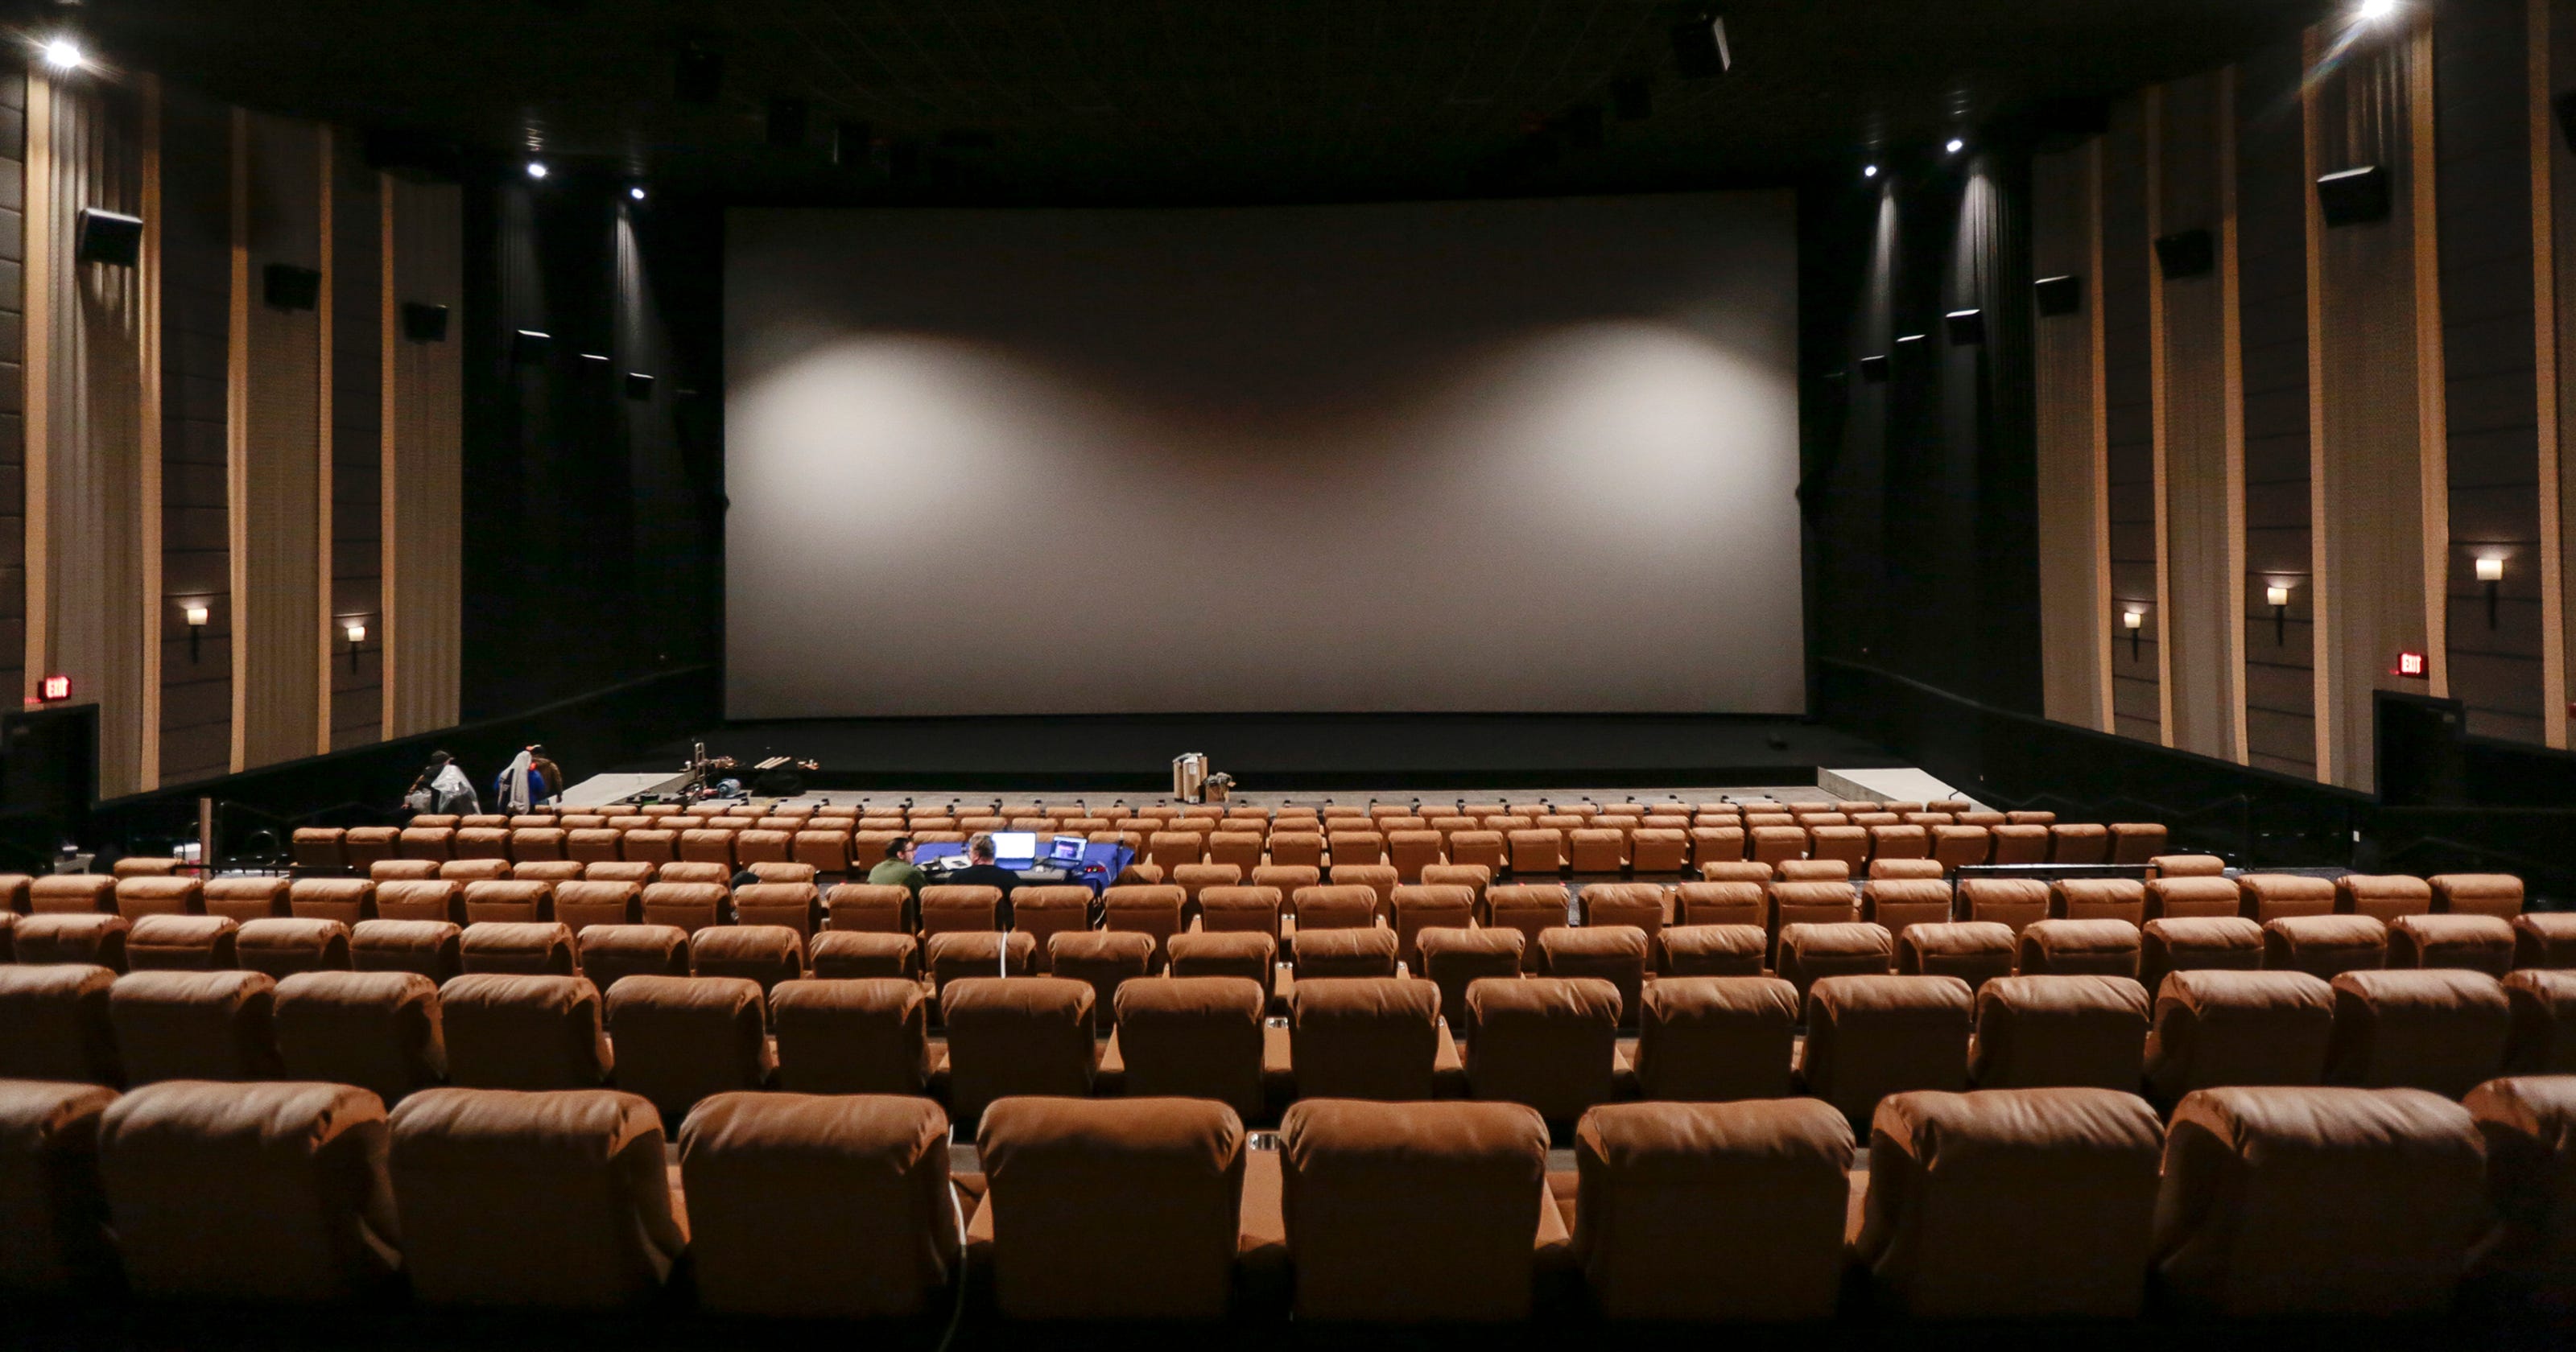 New movie screen at Emagine Novi is Michigan's largest